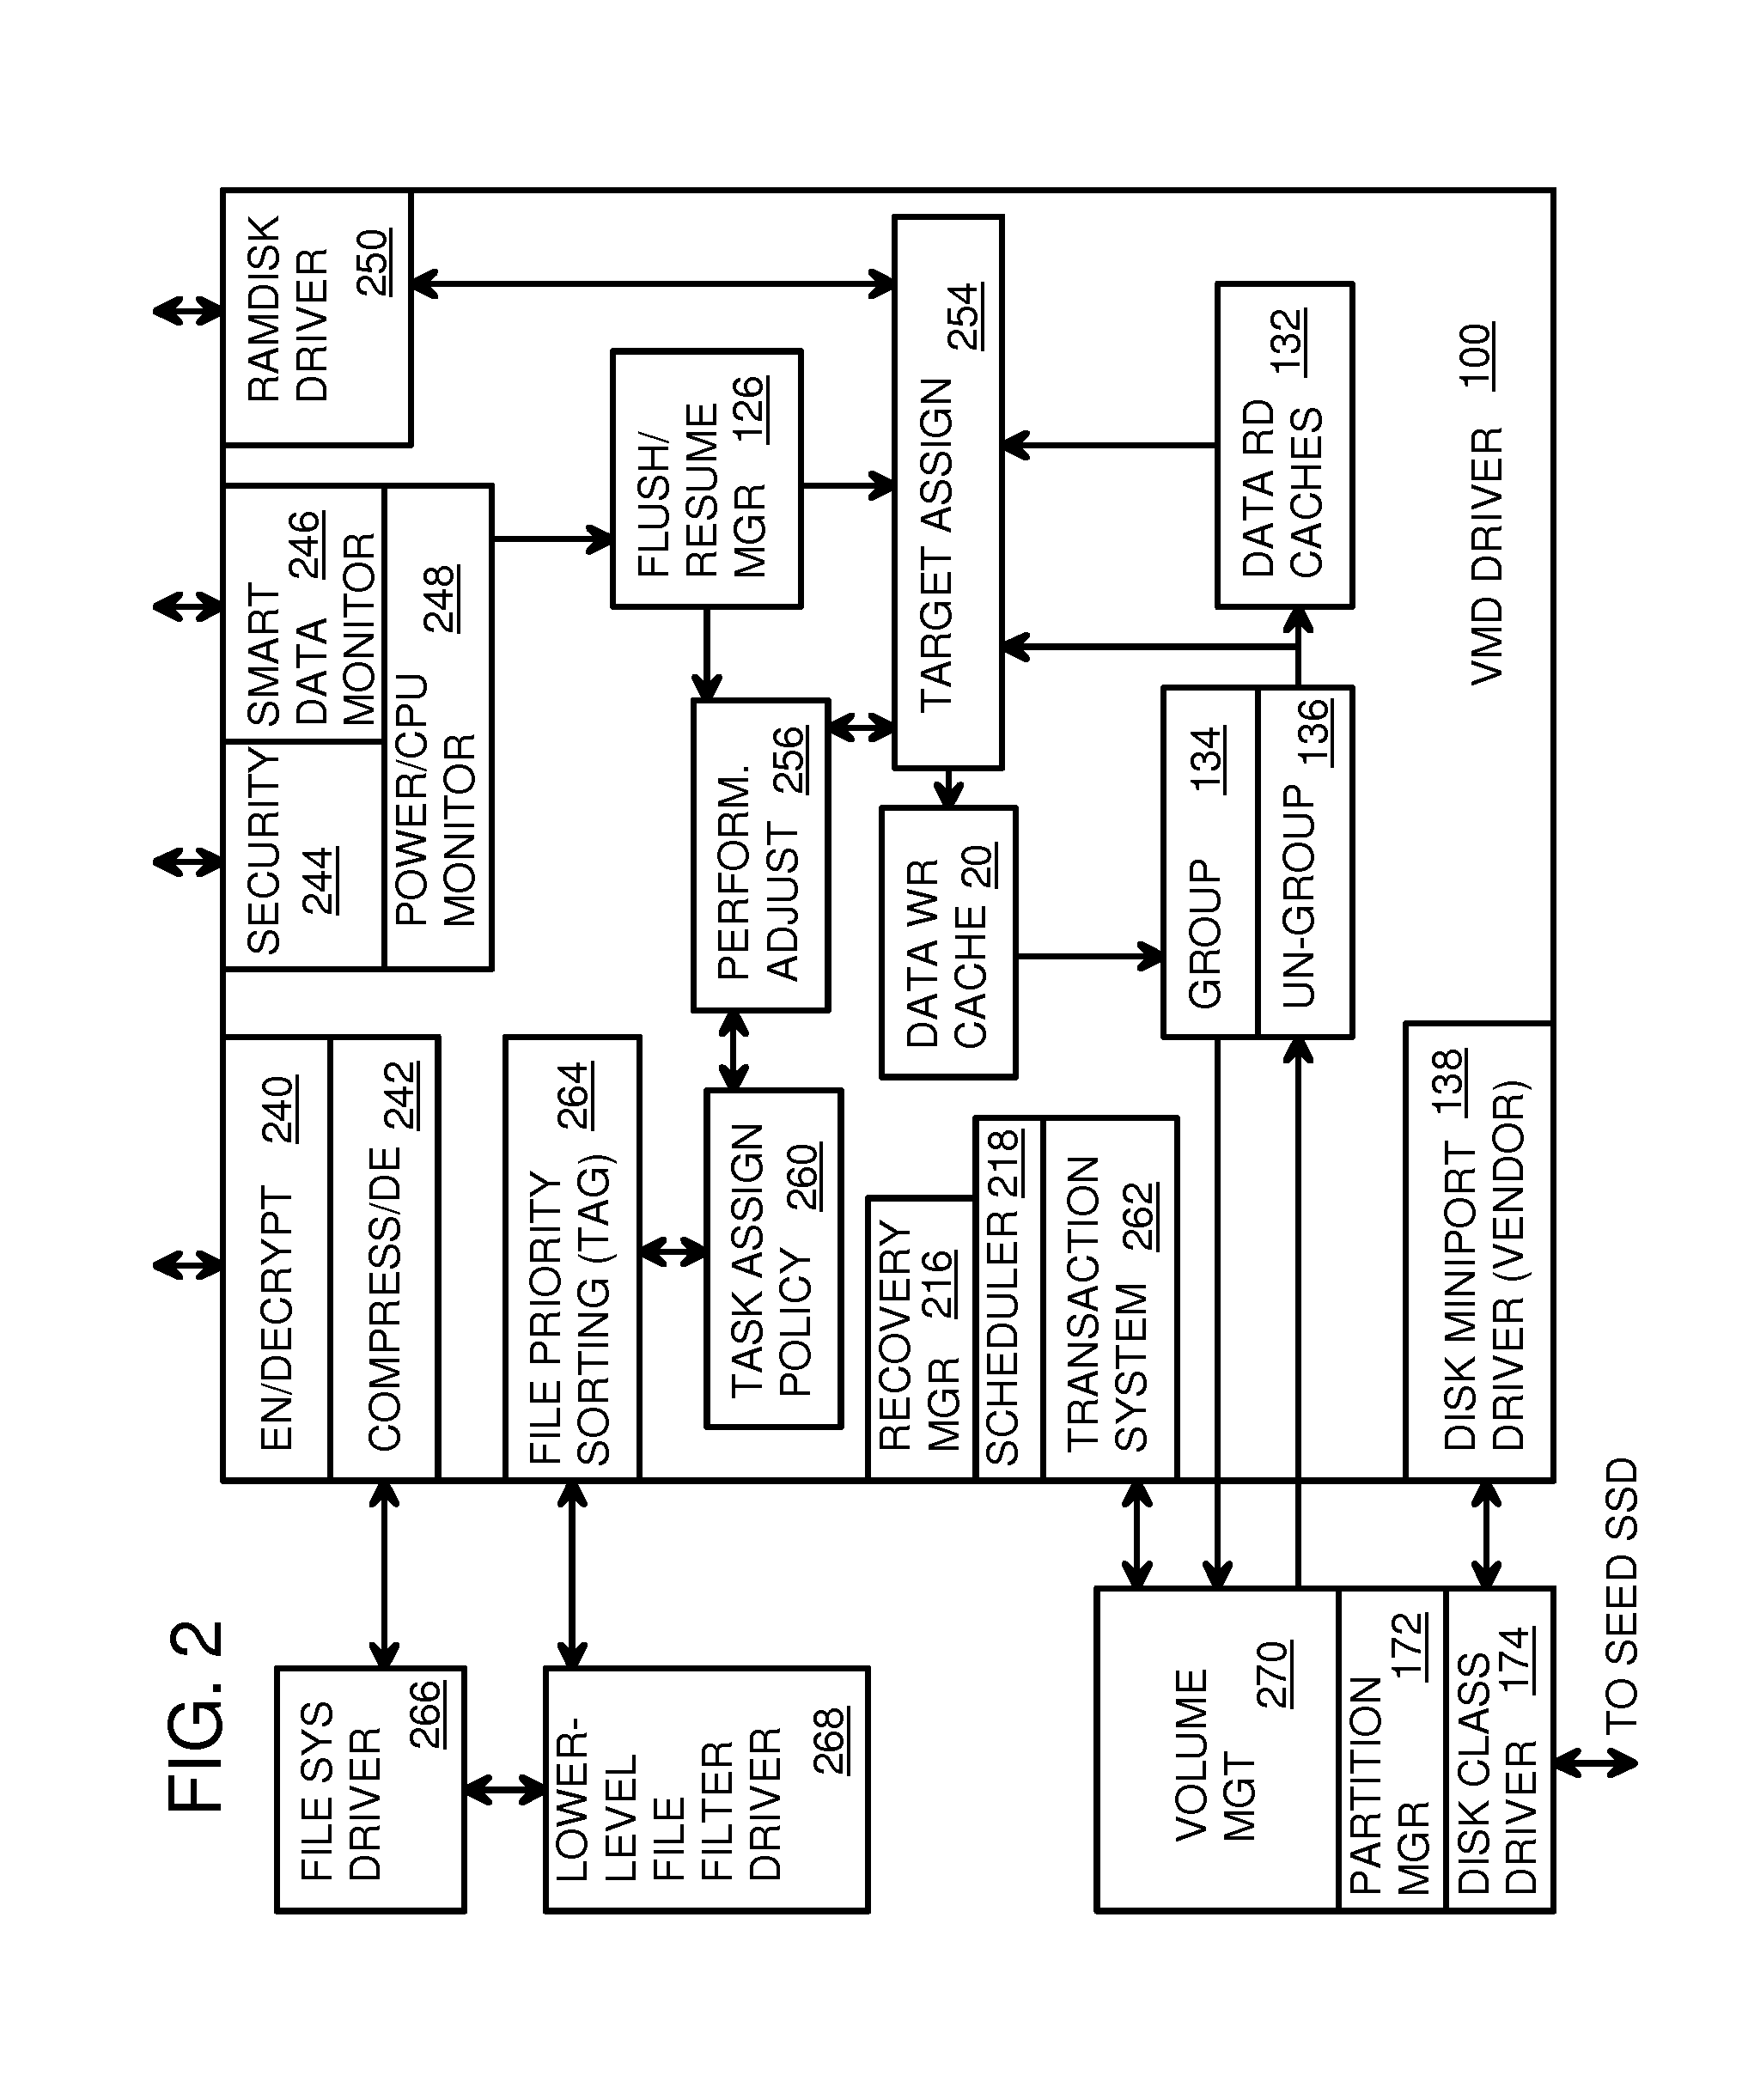 Virtual memory device (VMD) application/driver with dual-level interception for data-type splitting, meta-page grouping, and diversion of temp files to ramdisks for enhanced flash endurance